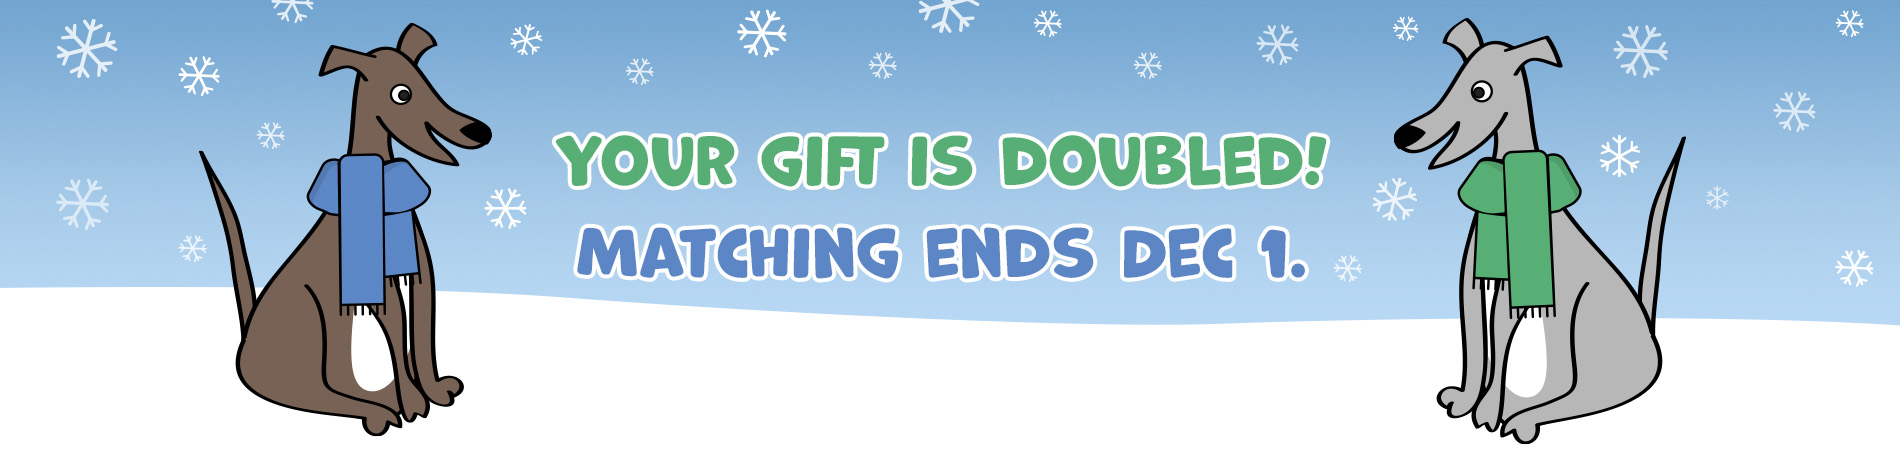 Giving Tuesday gifts are matched until December 1.